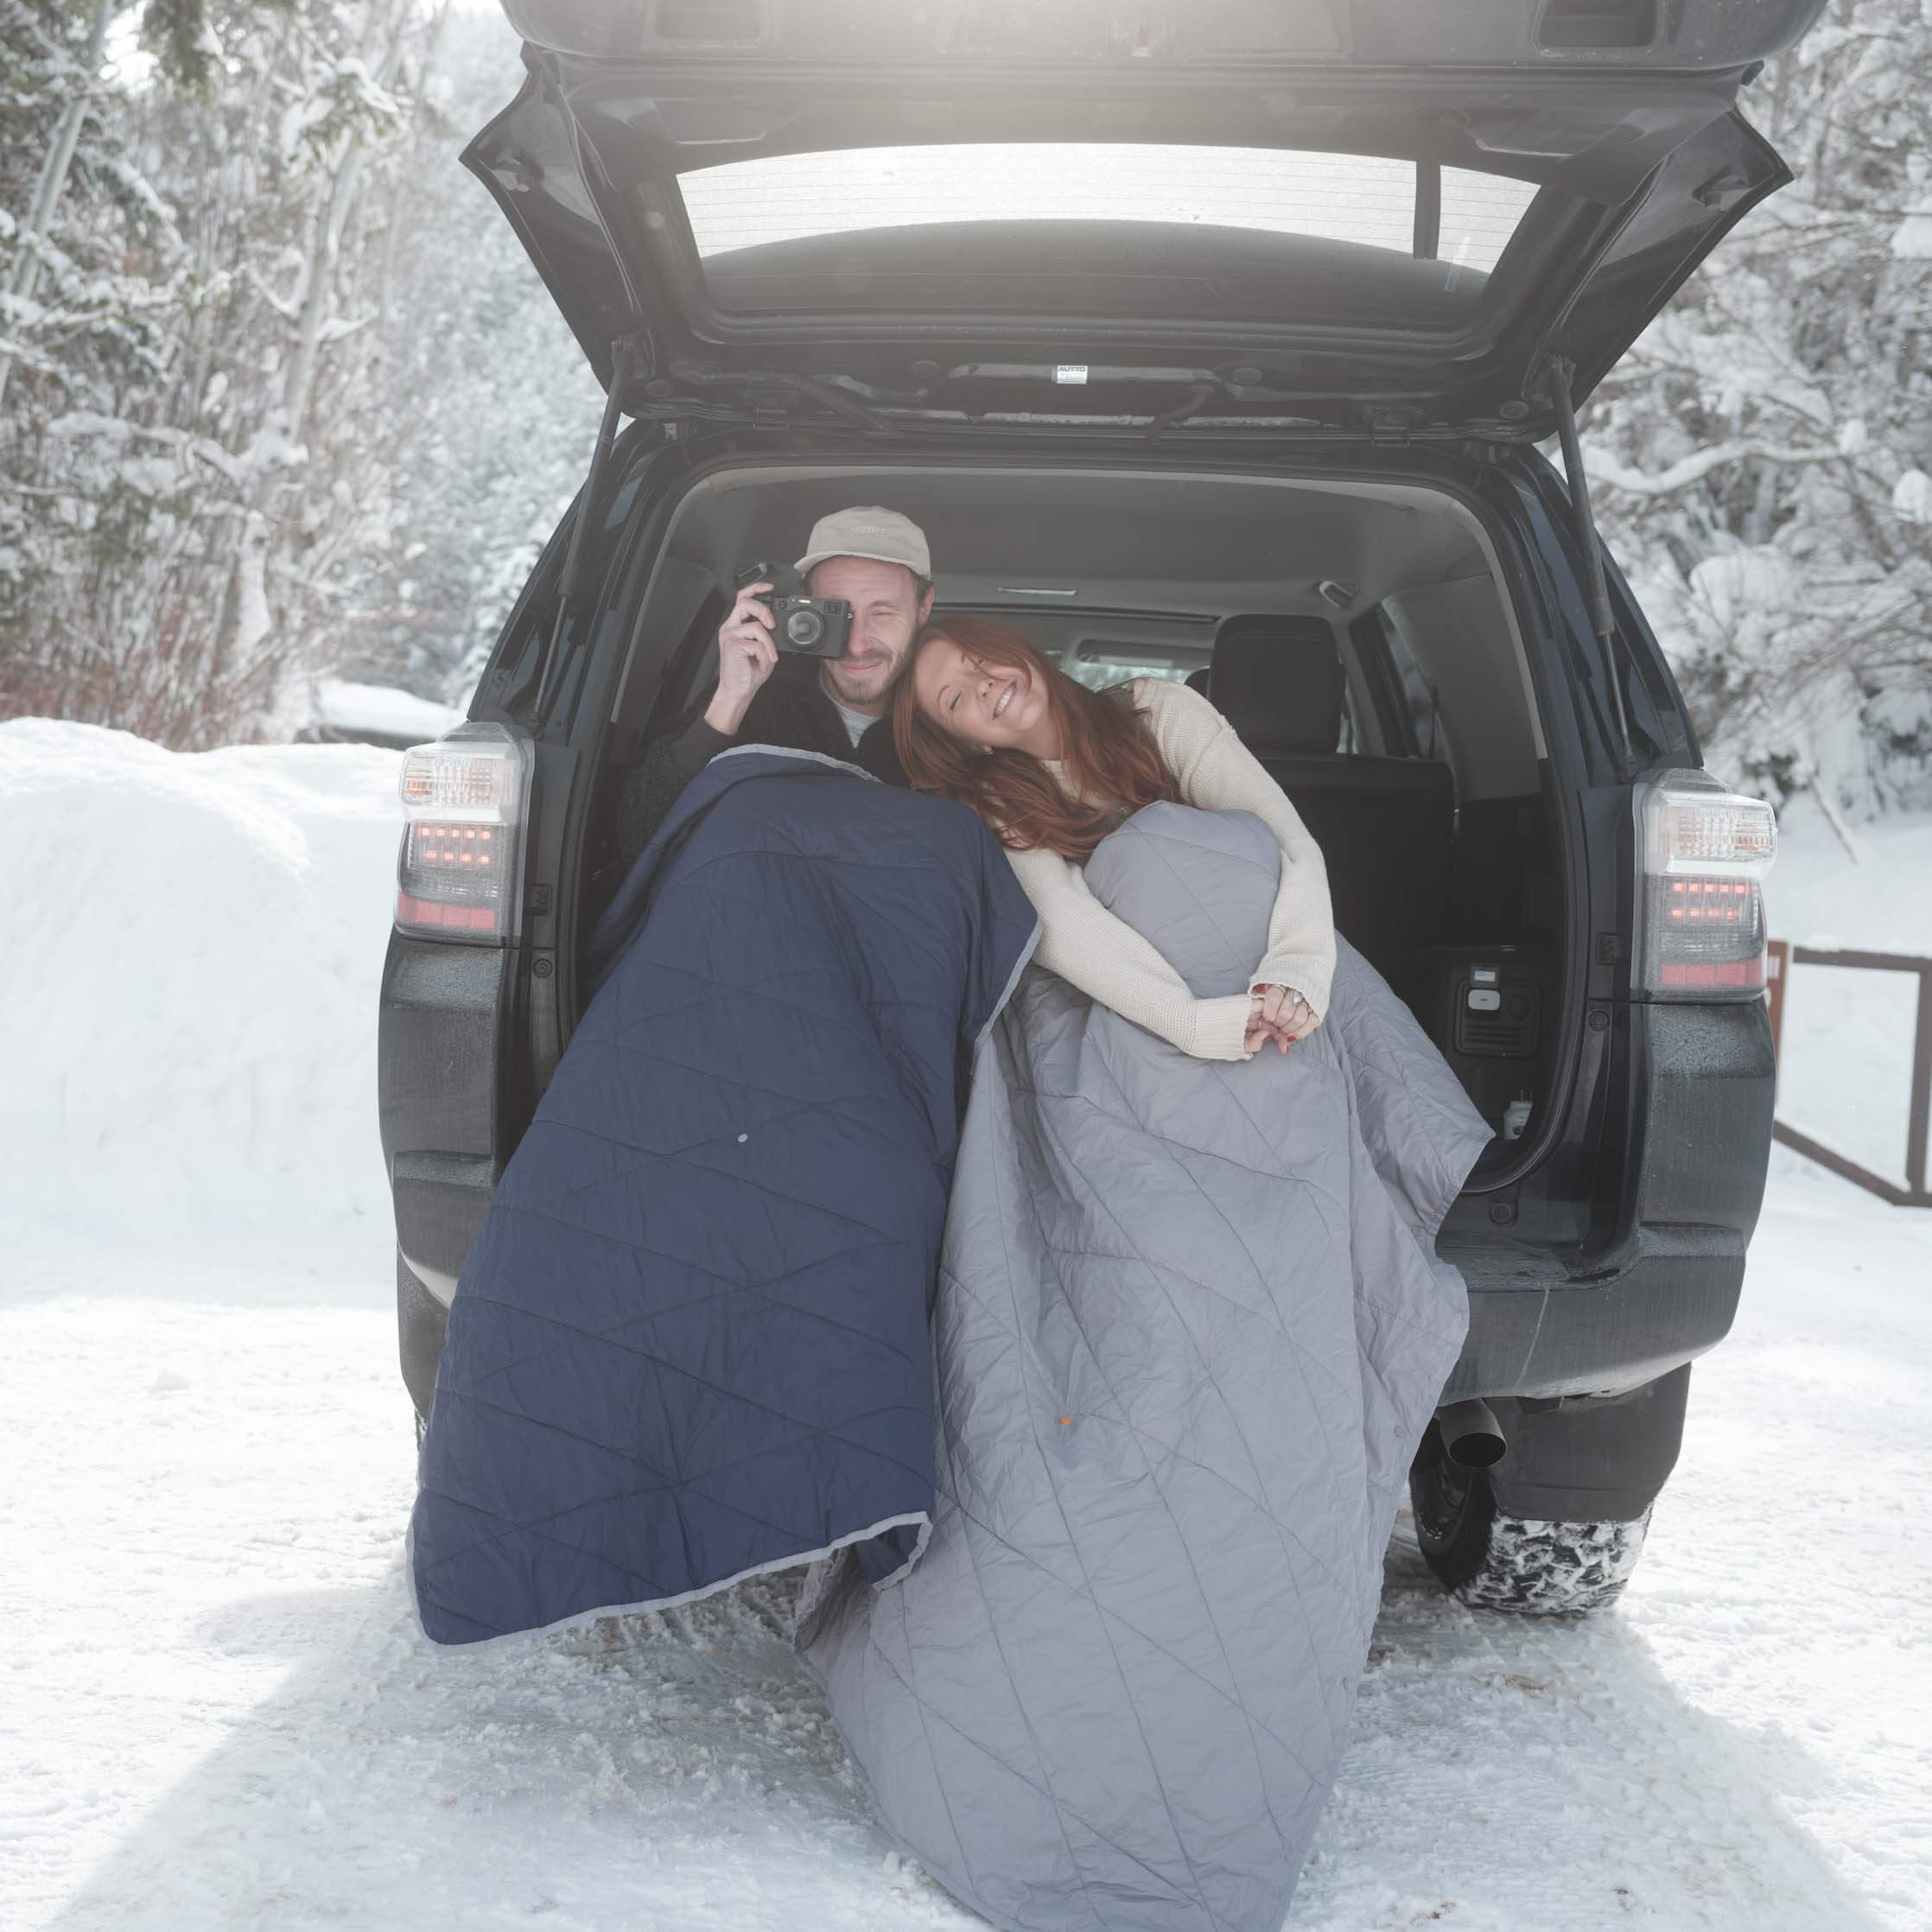 GARAGE SALE | Layover™ Travel Blanket - Insulated & Packable | Blue